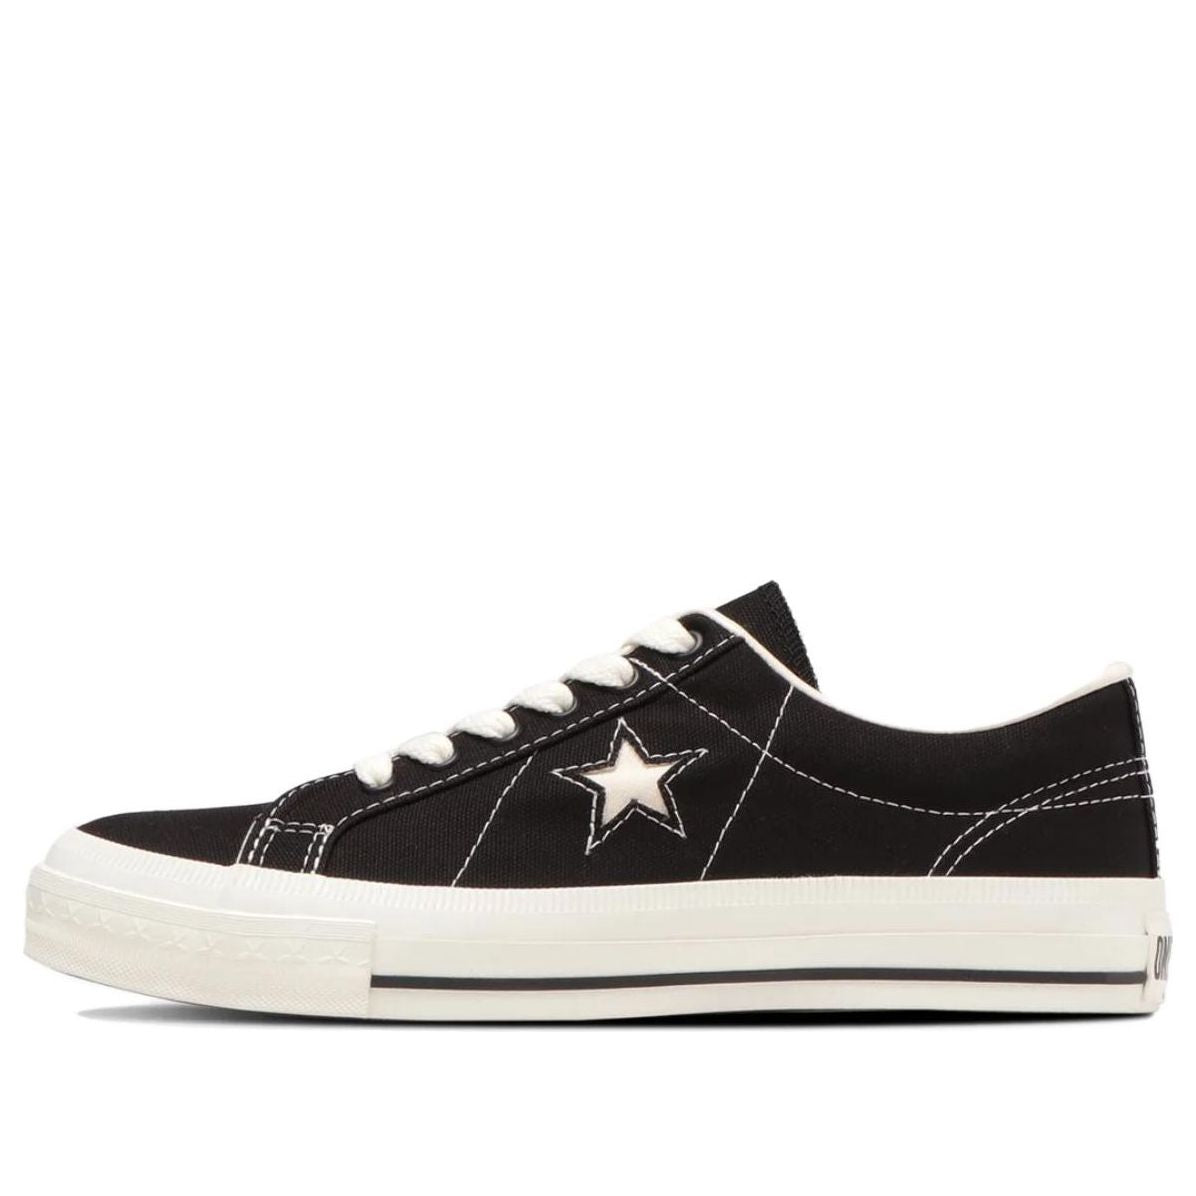 Converse One Star Made in Japan Vintage Canvas 'Black' 35200520